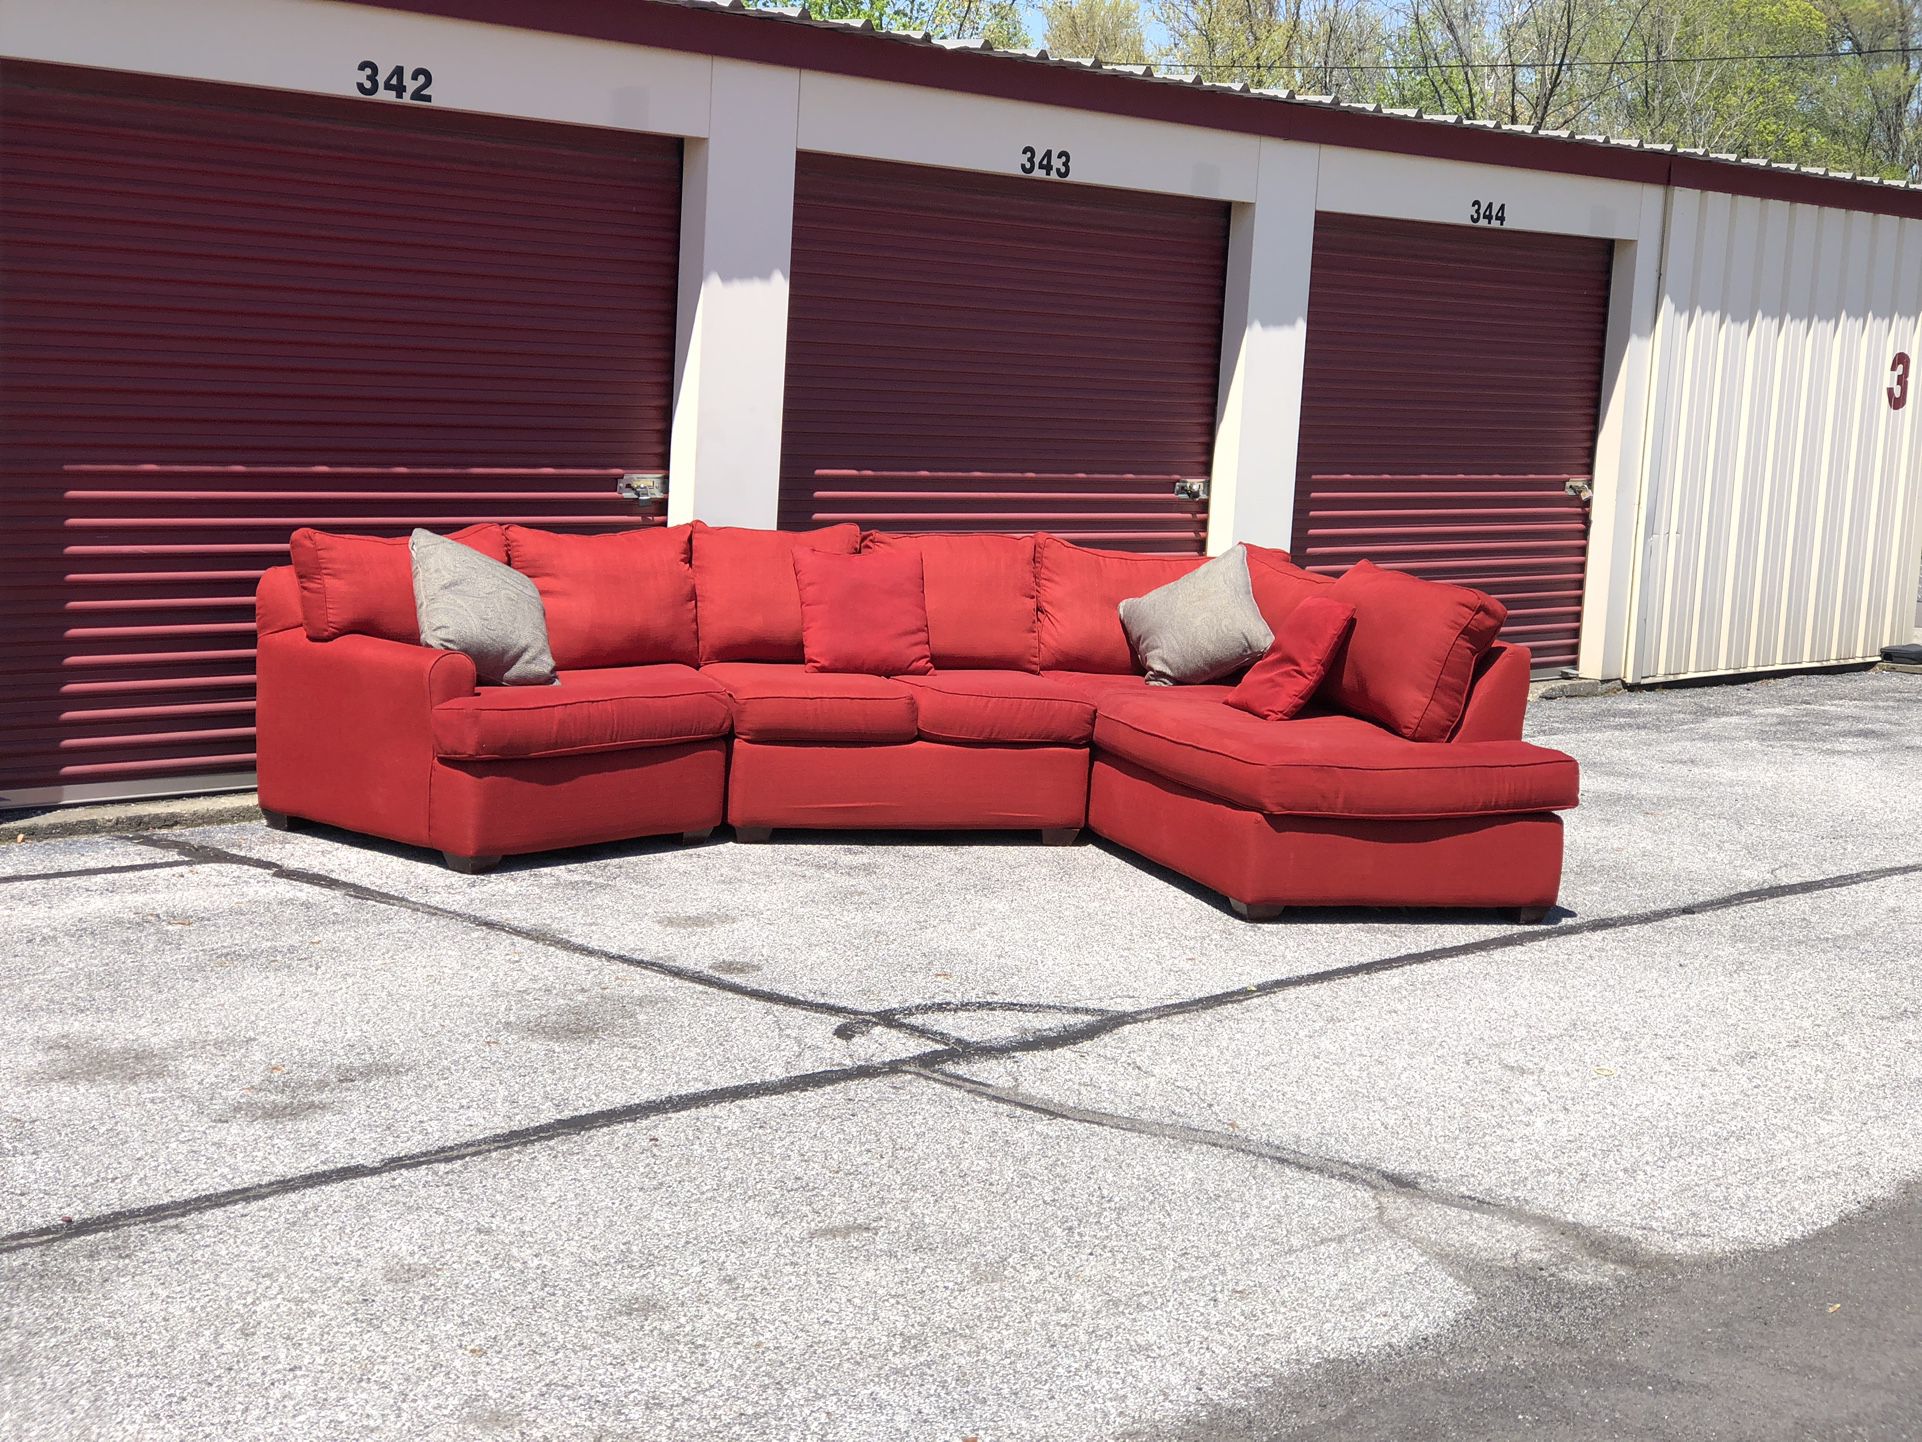 FREE delivery - Large Sectional U Shape Couch Sofa Set, Red